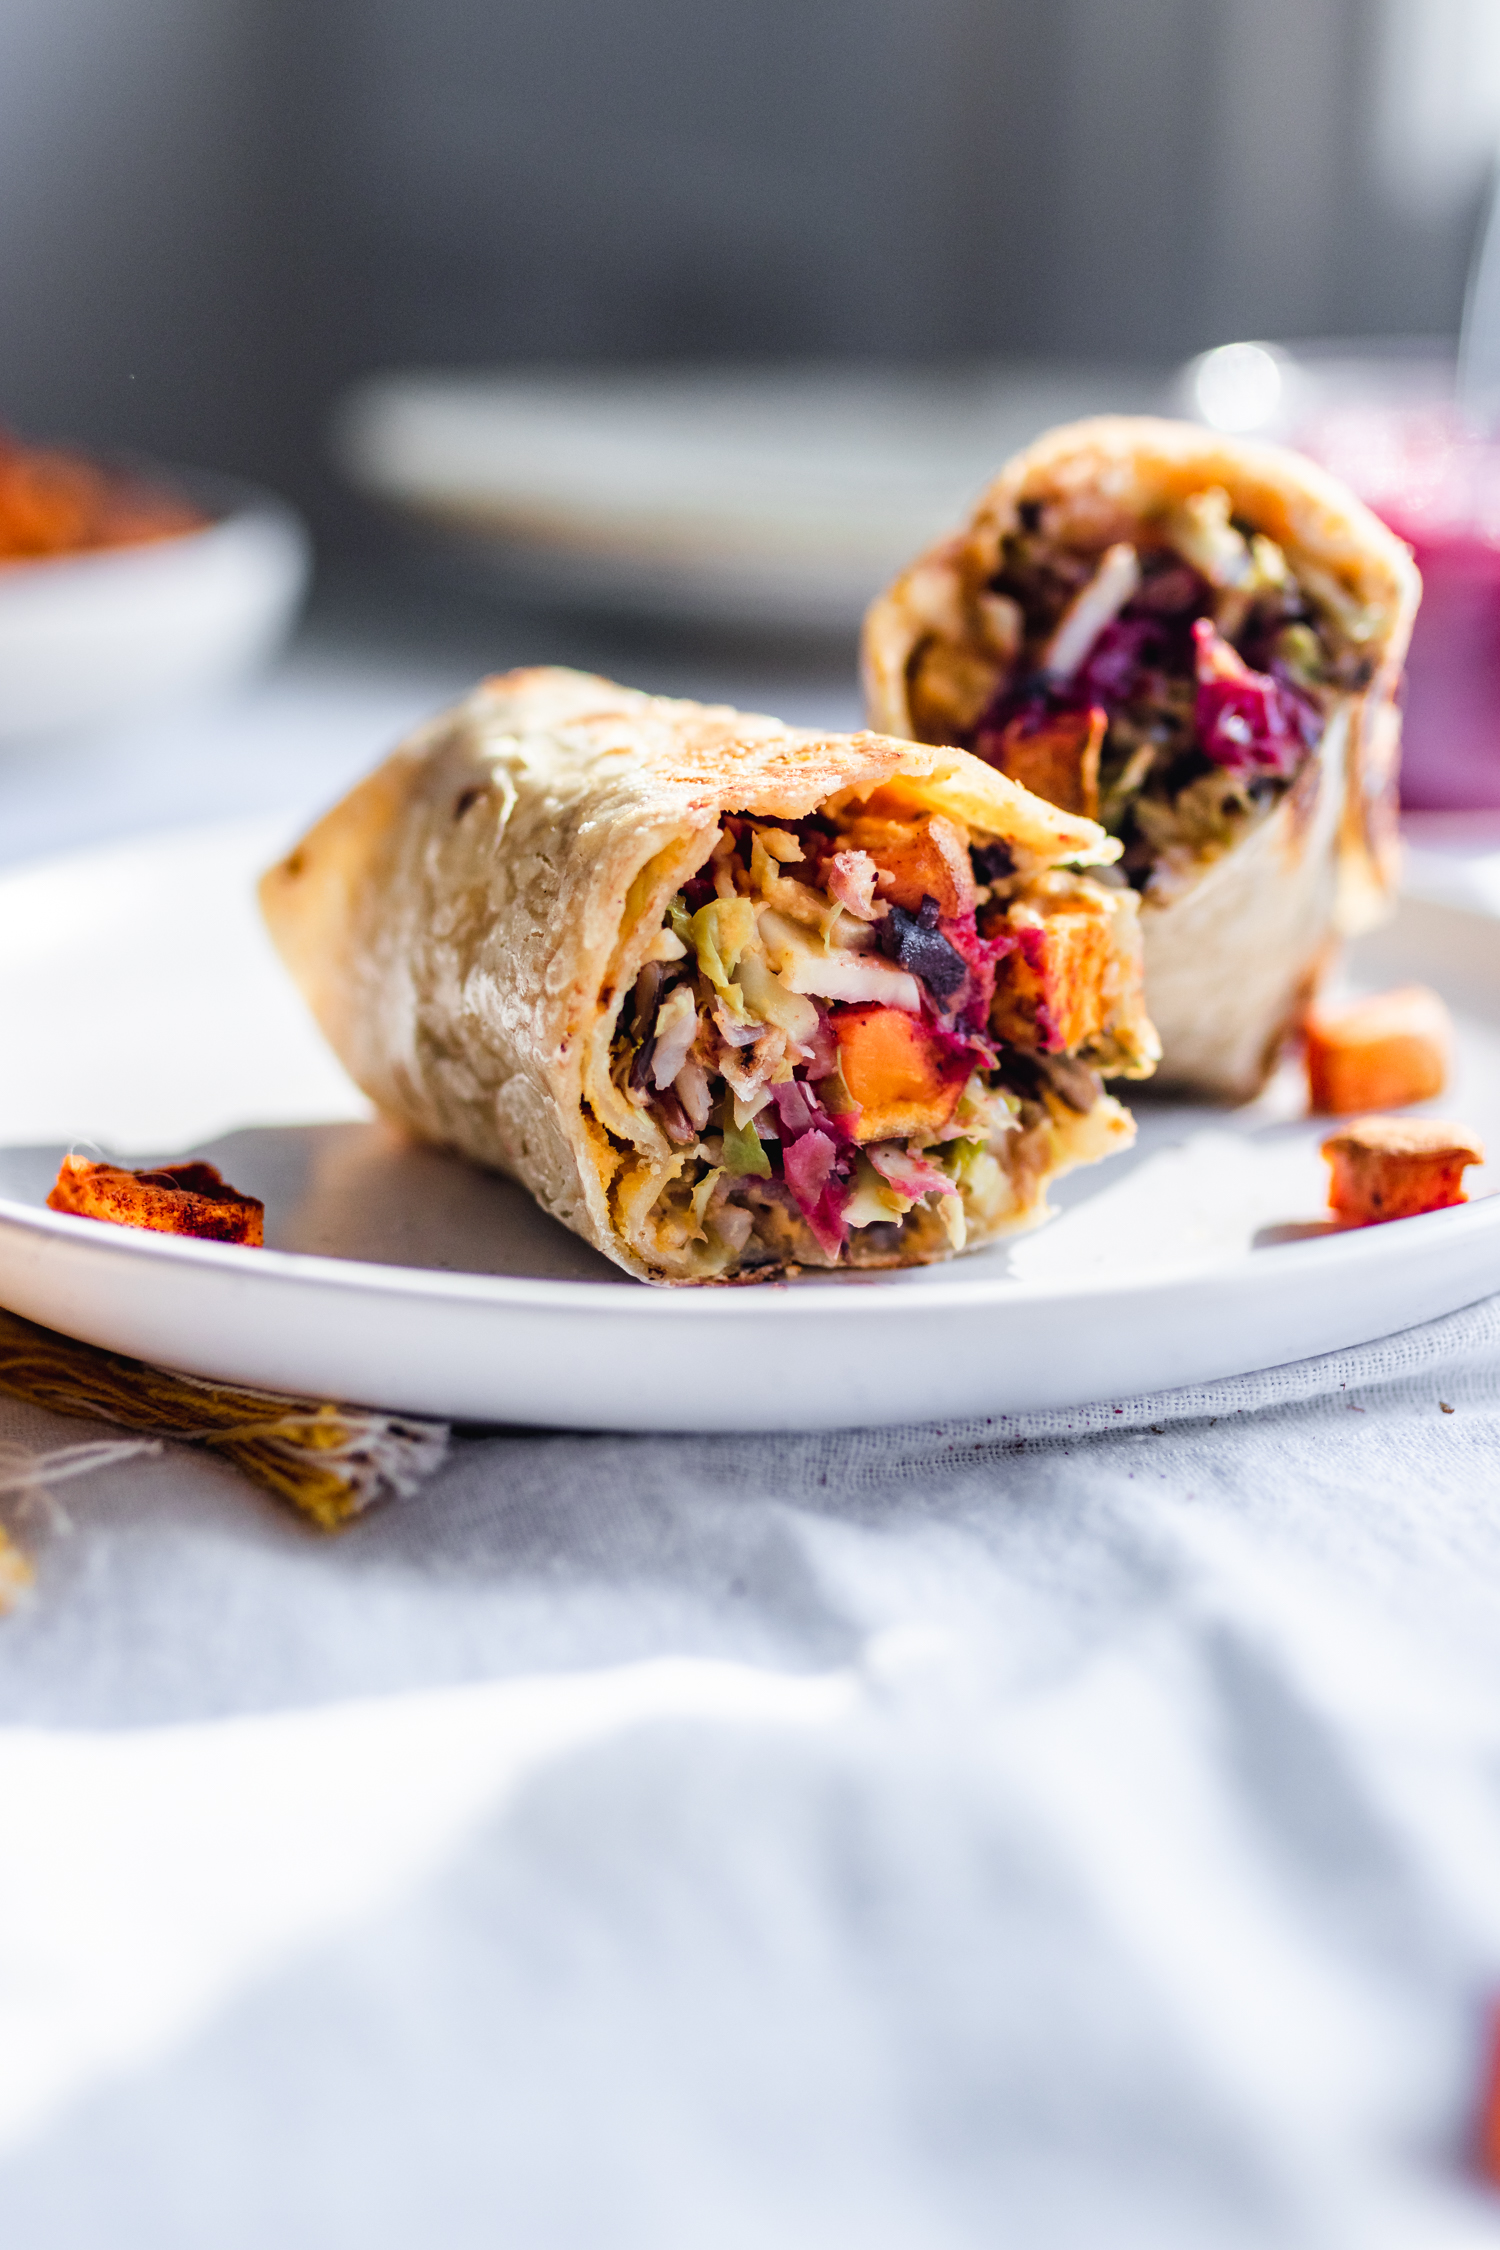 Fall Inspired Burrito Wrap from Murielle Banackissa